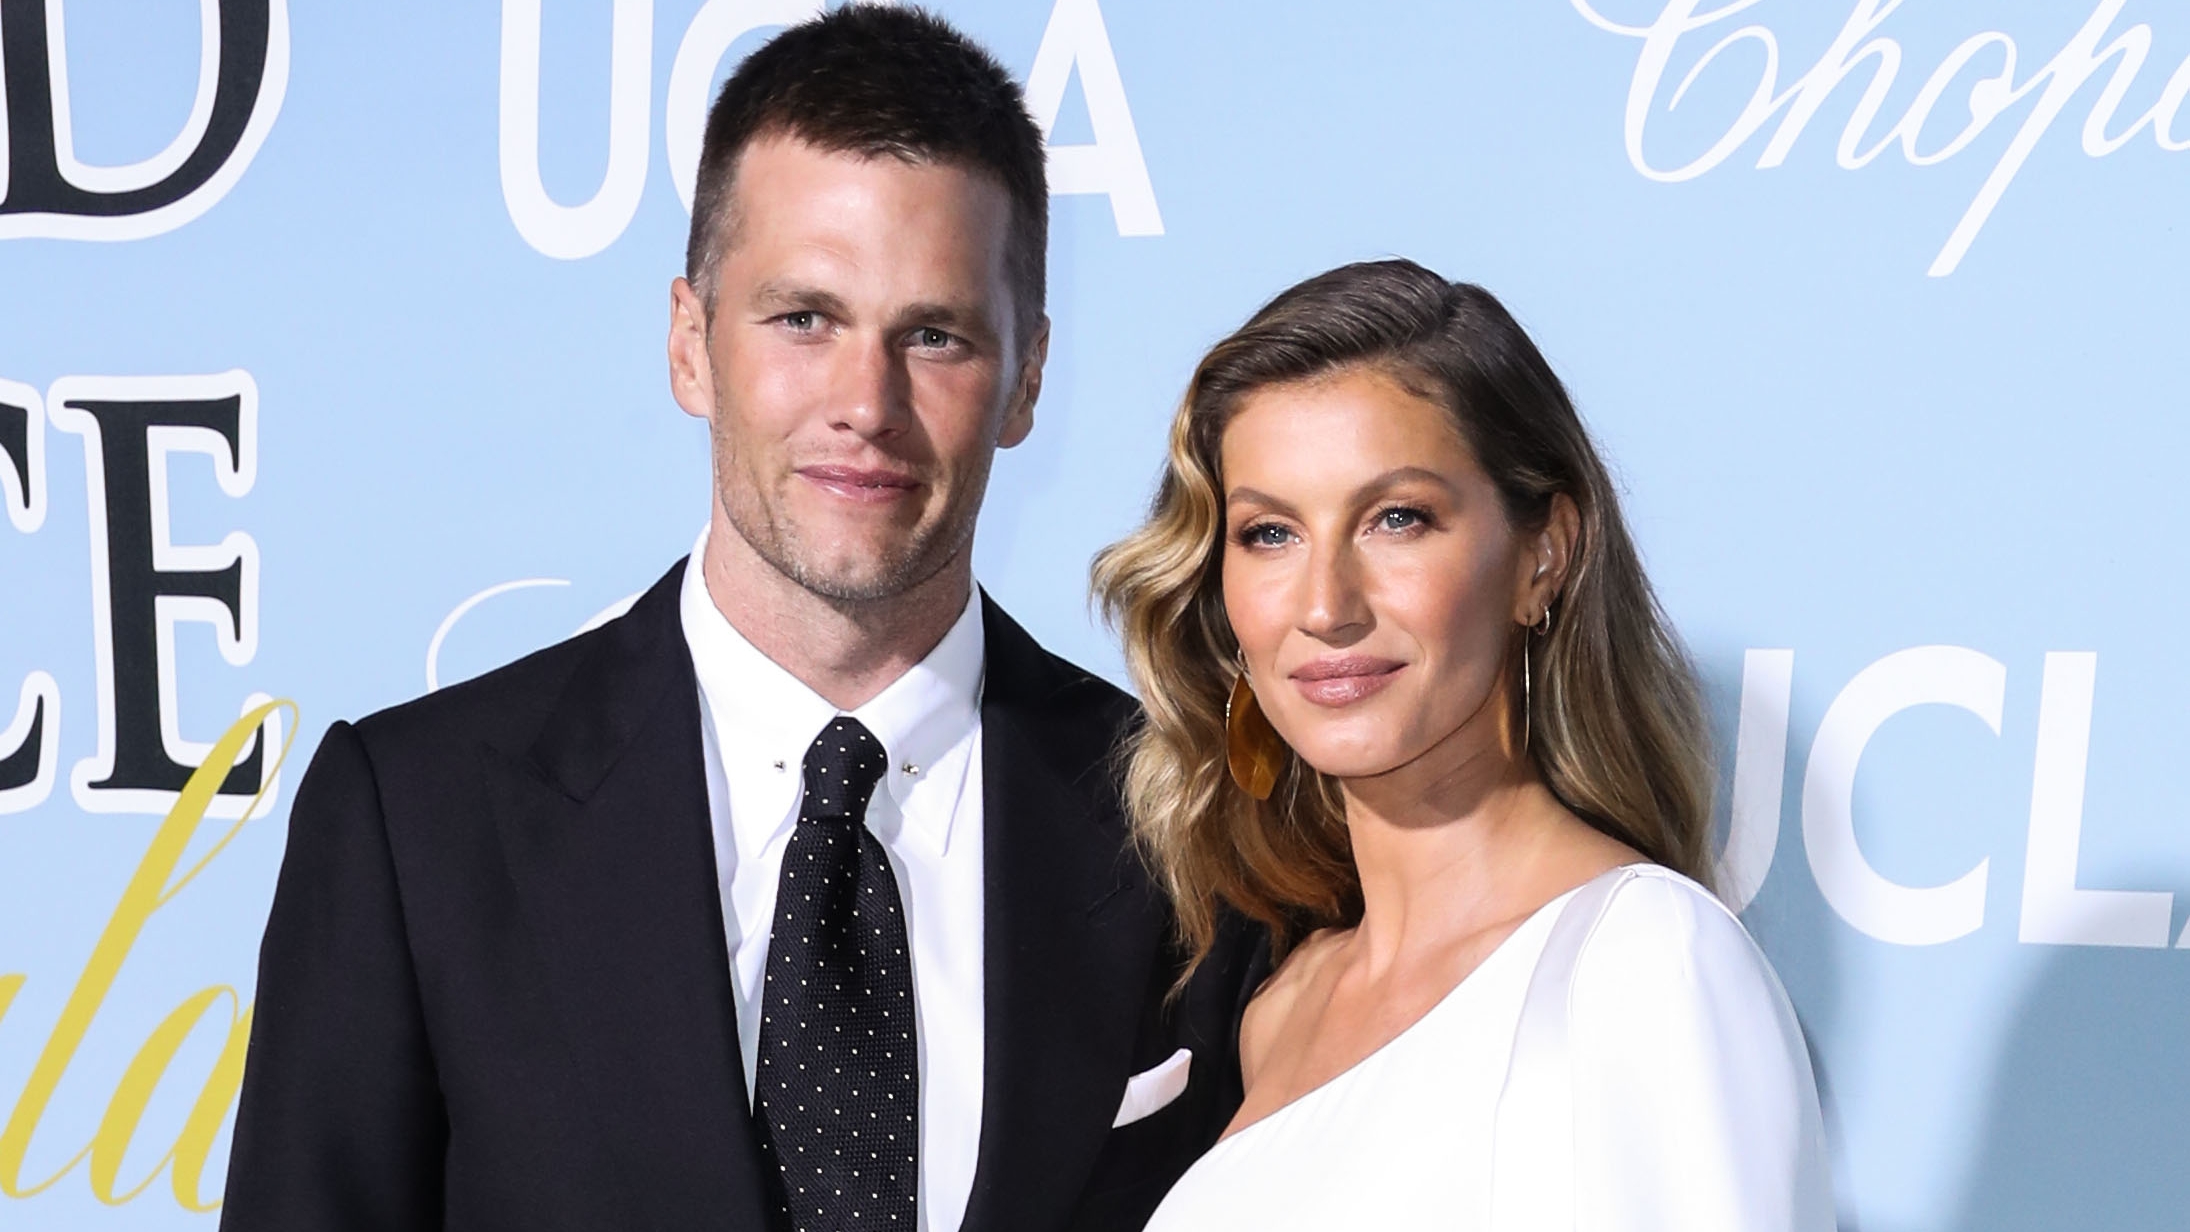 An open letter to Gisele Bündchen upon your move to Tampa